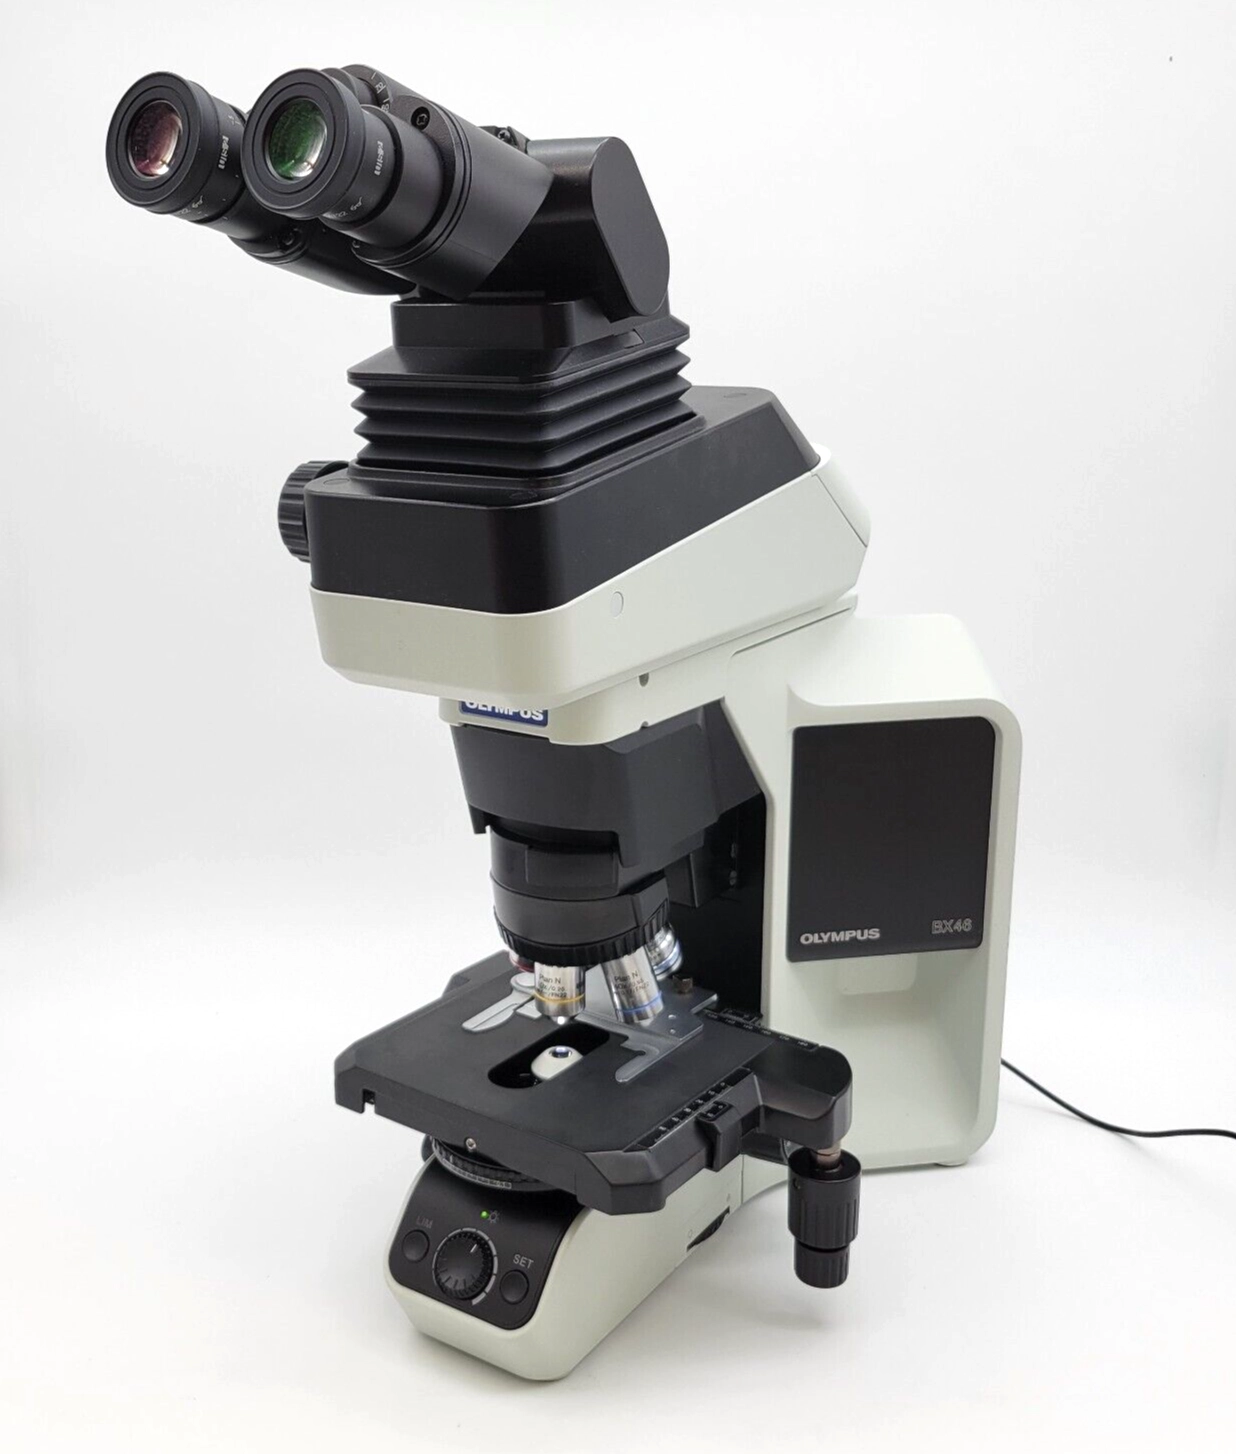 Olympus Microscope BX46 LED with Tilting Lift Ergo Head and 100x Objective